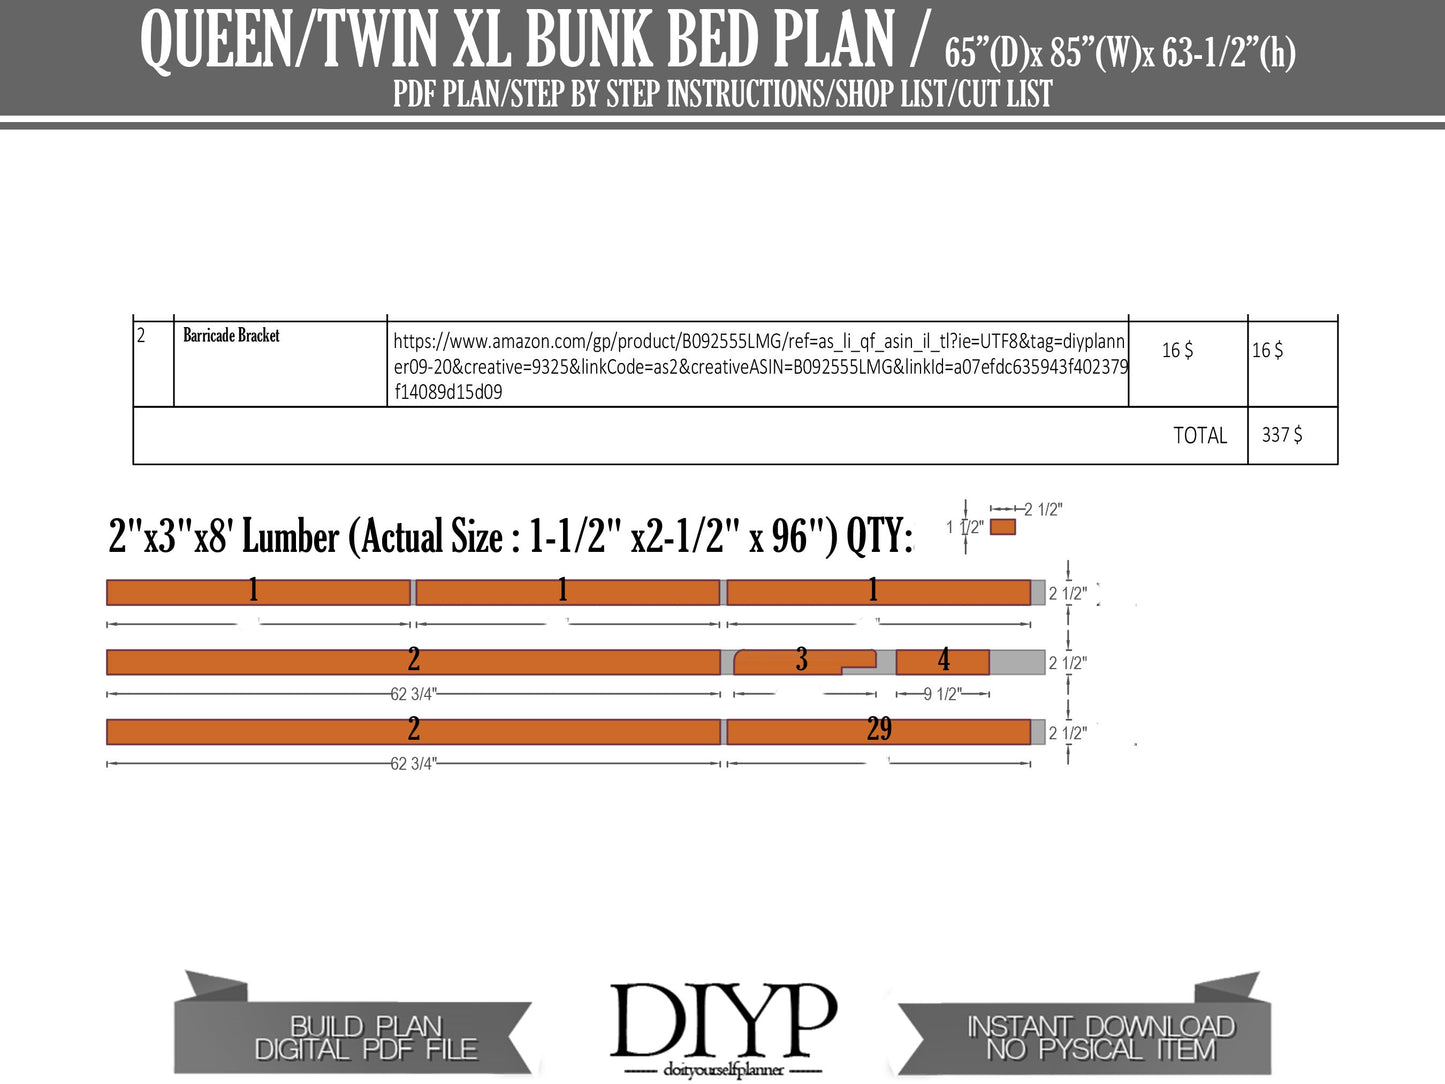 DIY plans for Bunk Bed with Queen and Twin XL Bed - Make a stylish and useful bunk bed